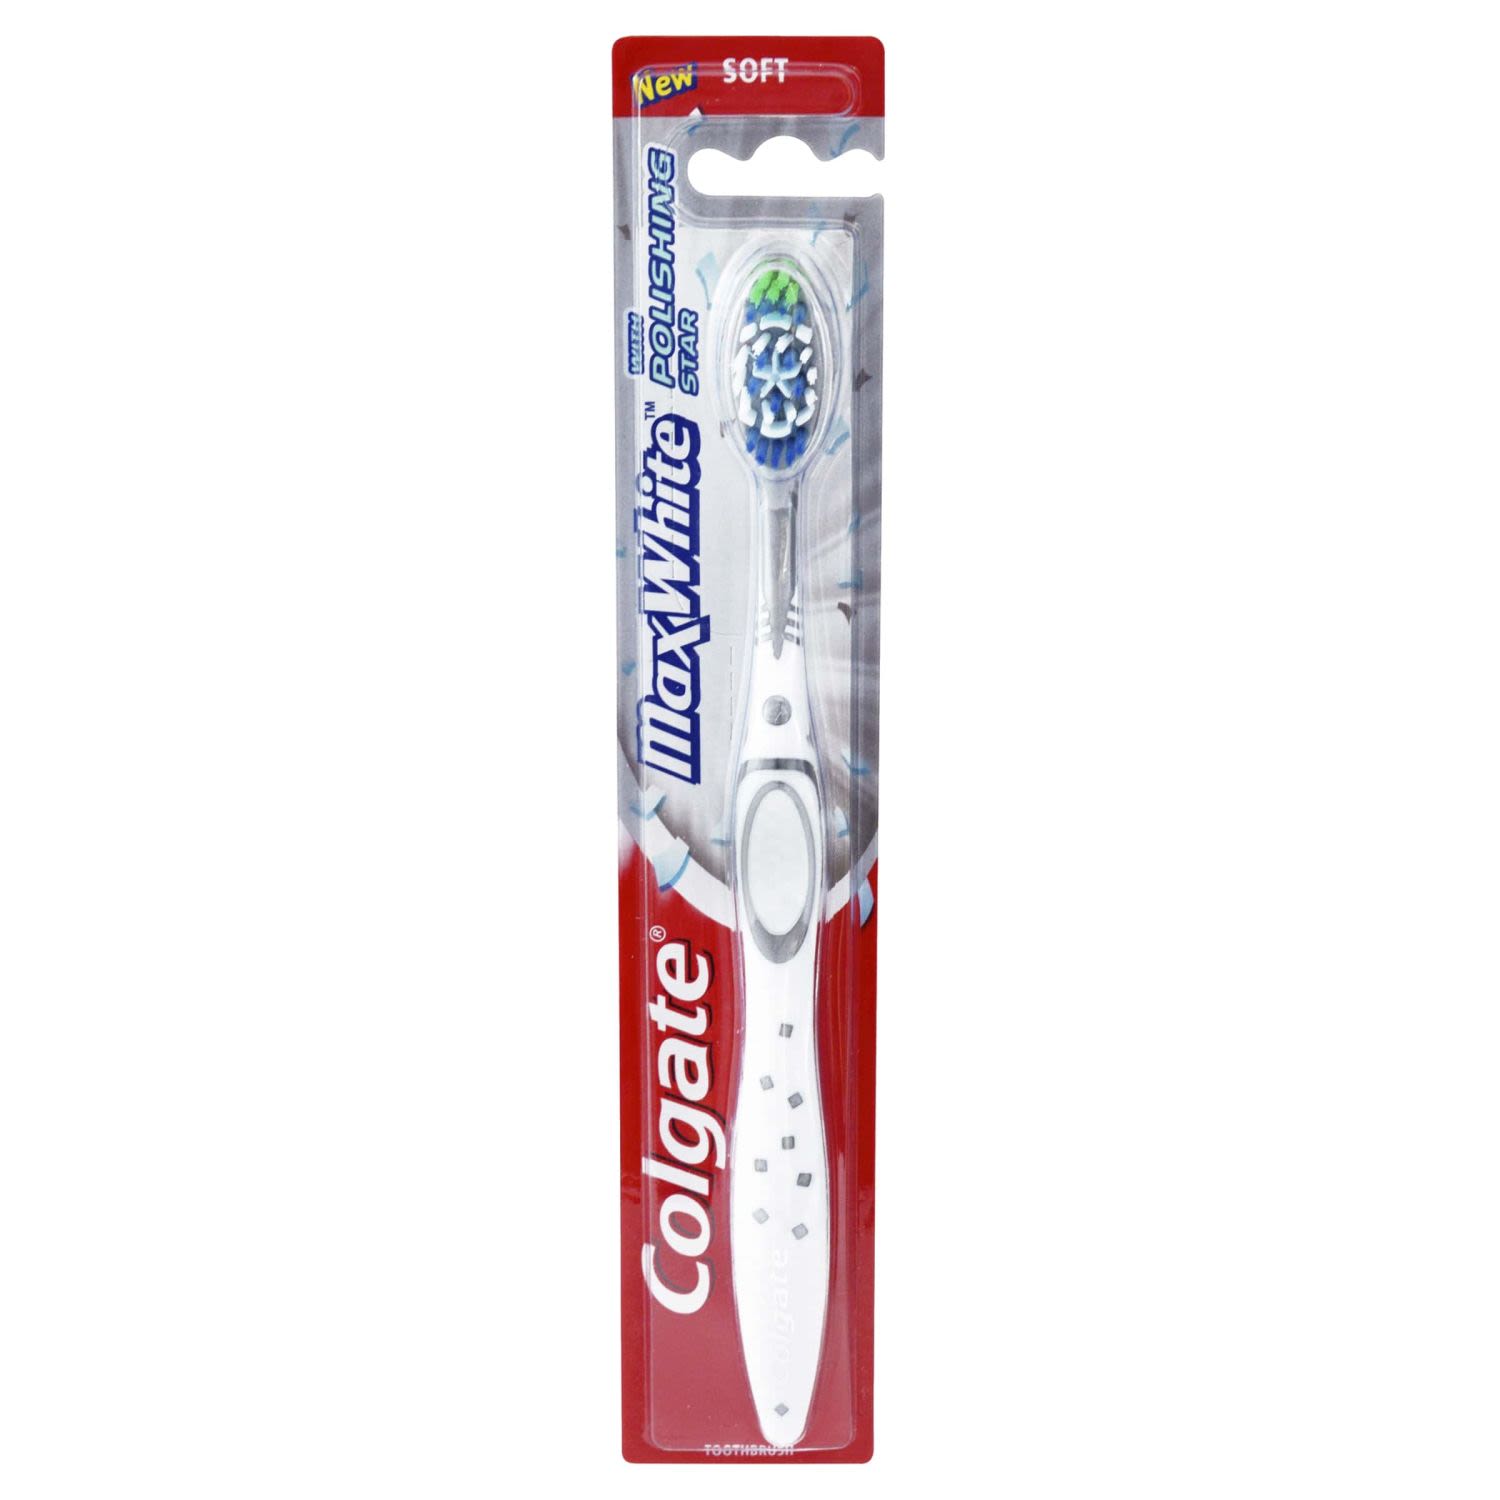 Colgate Max White with Polishing Star Toothbrush Soft, 1 Each